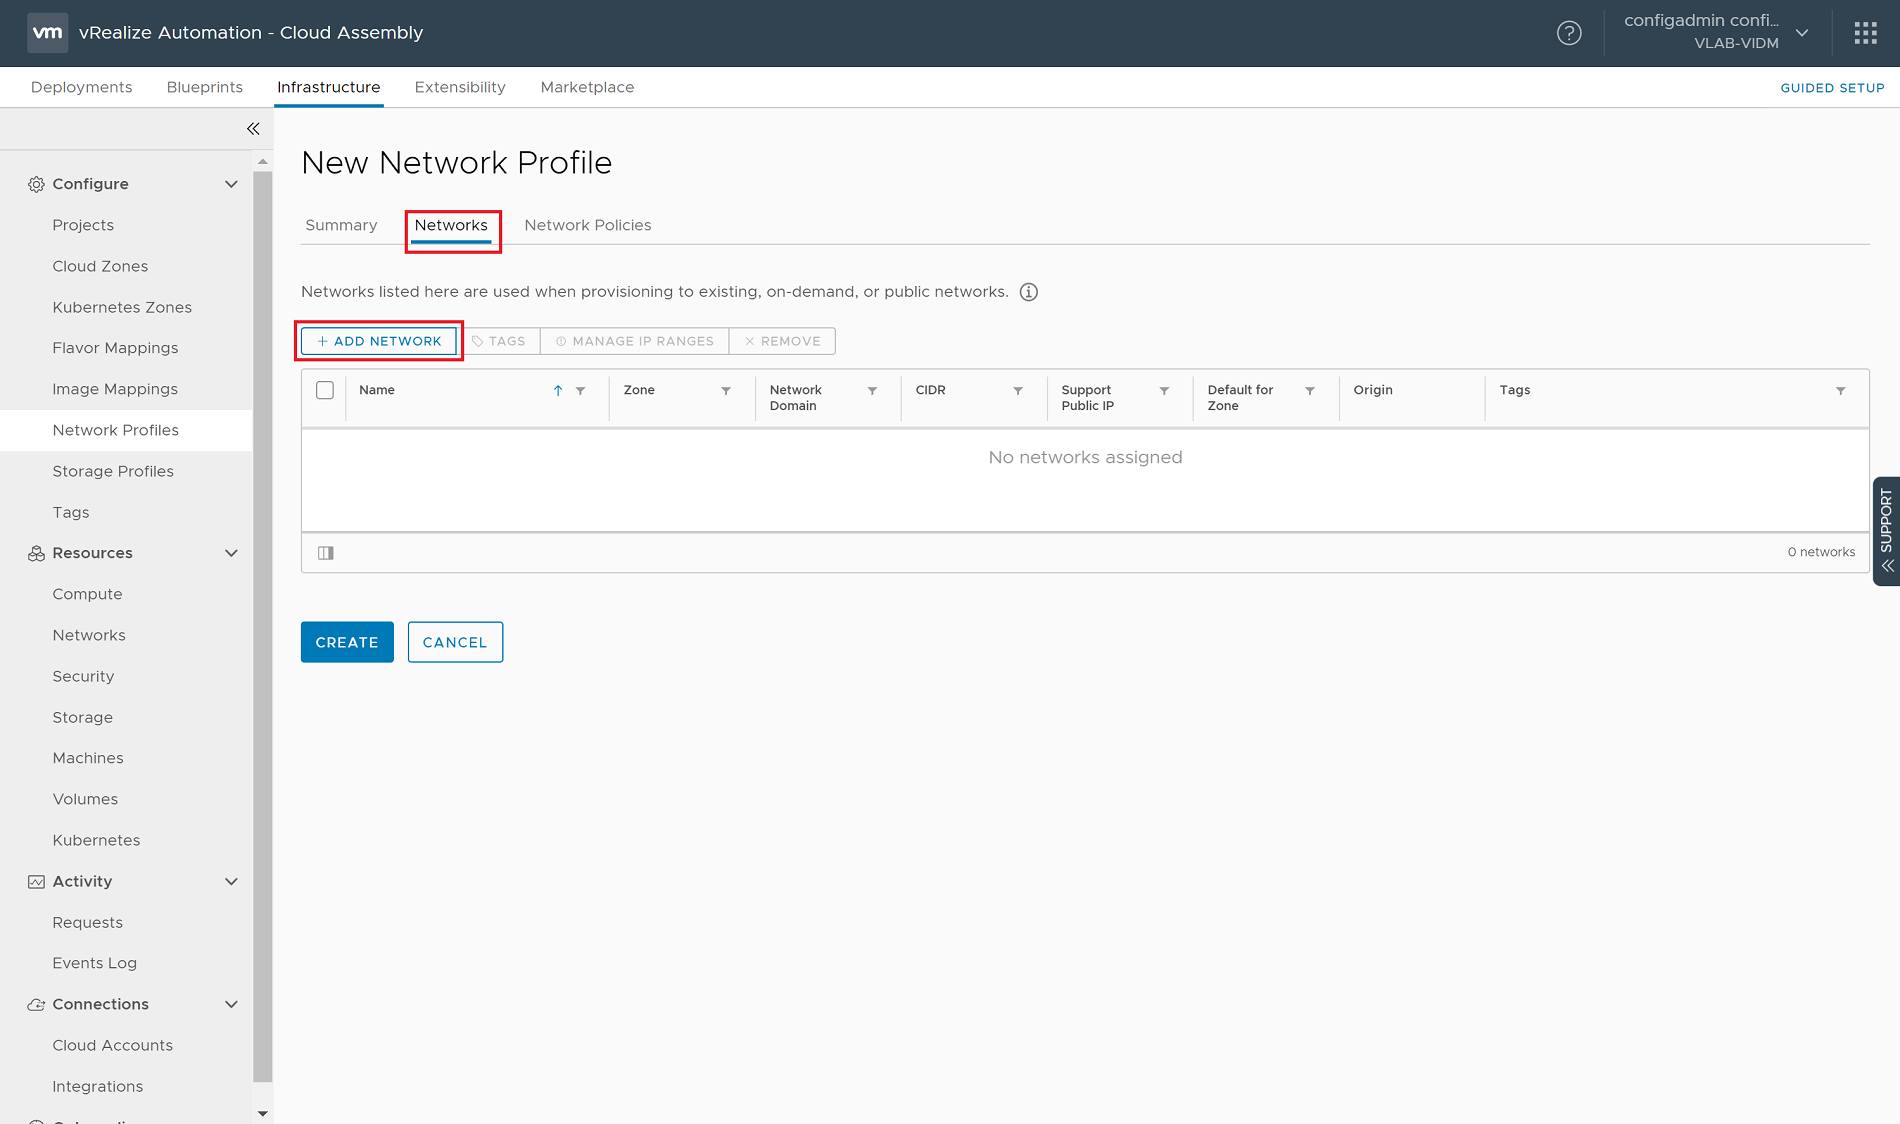 vRealize Automation 8.0 - Cloud Assembly - Infrastructure - Network Profiles - New Network Profile - Networks Tab